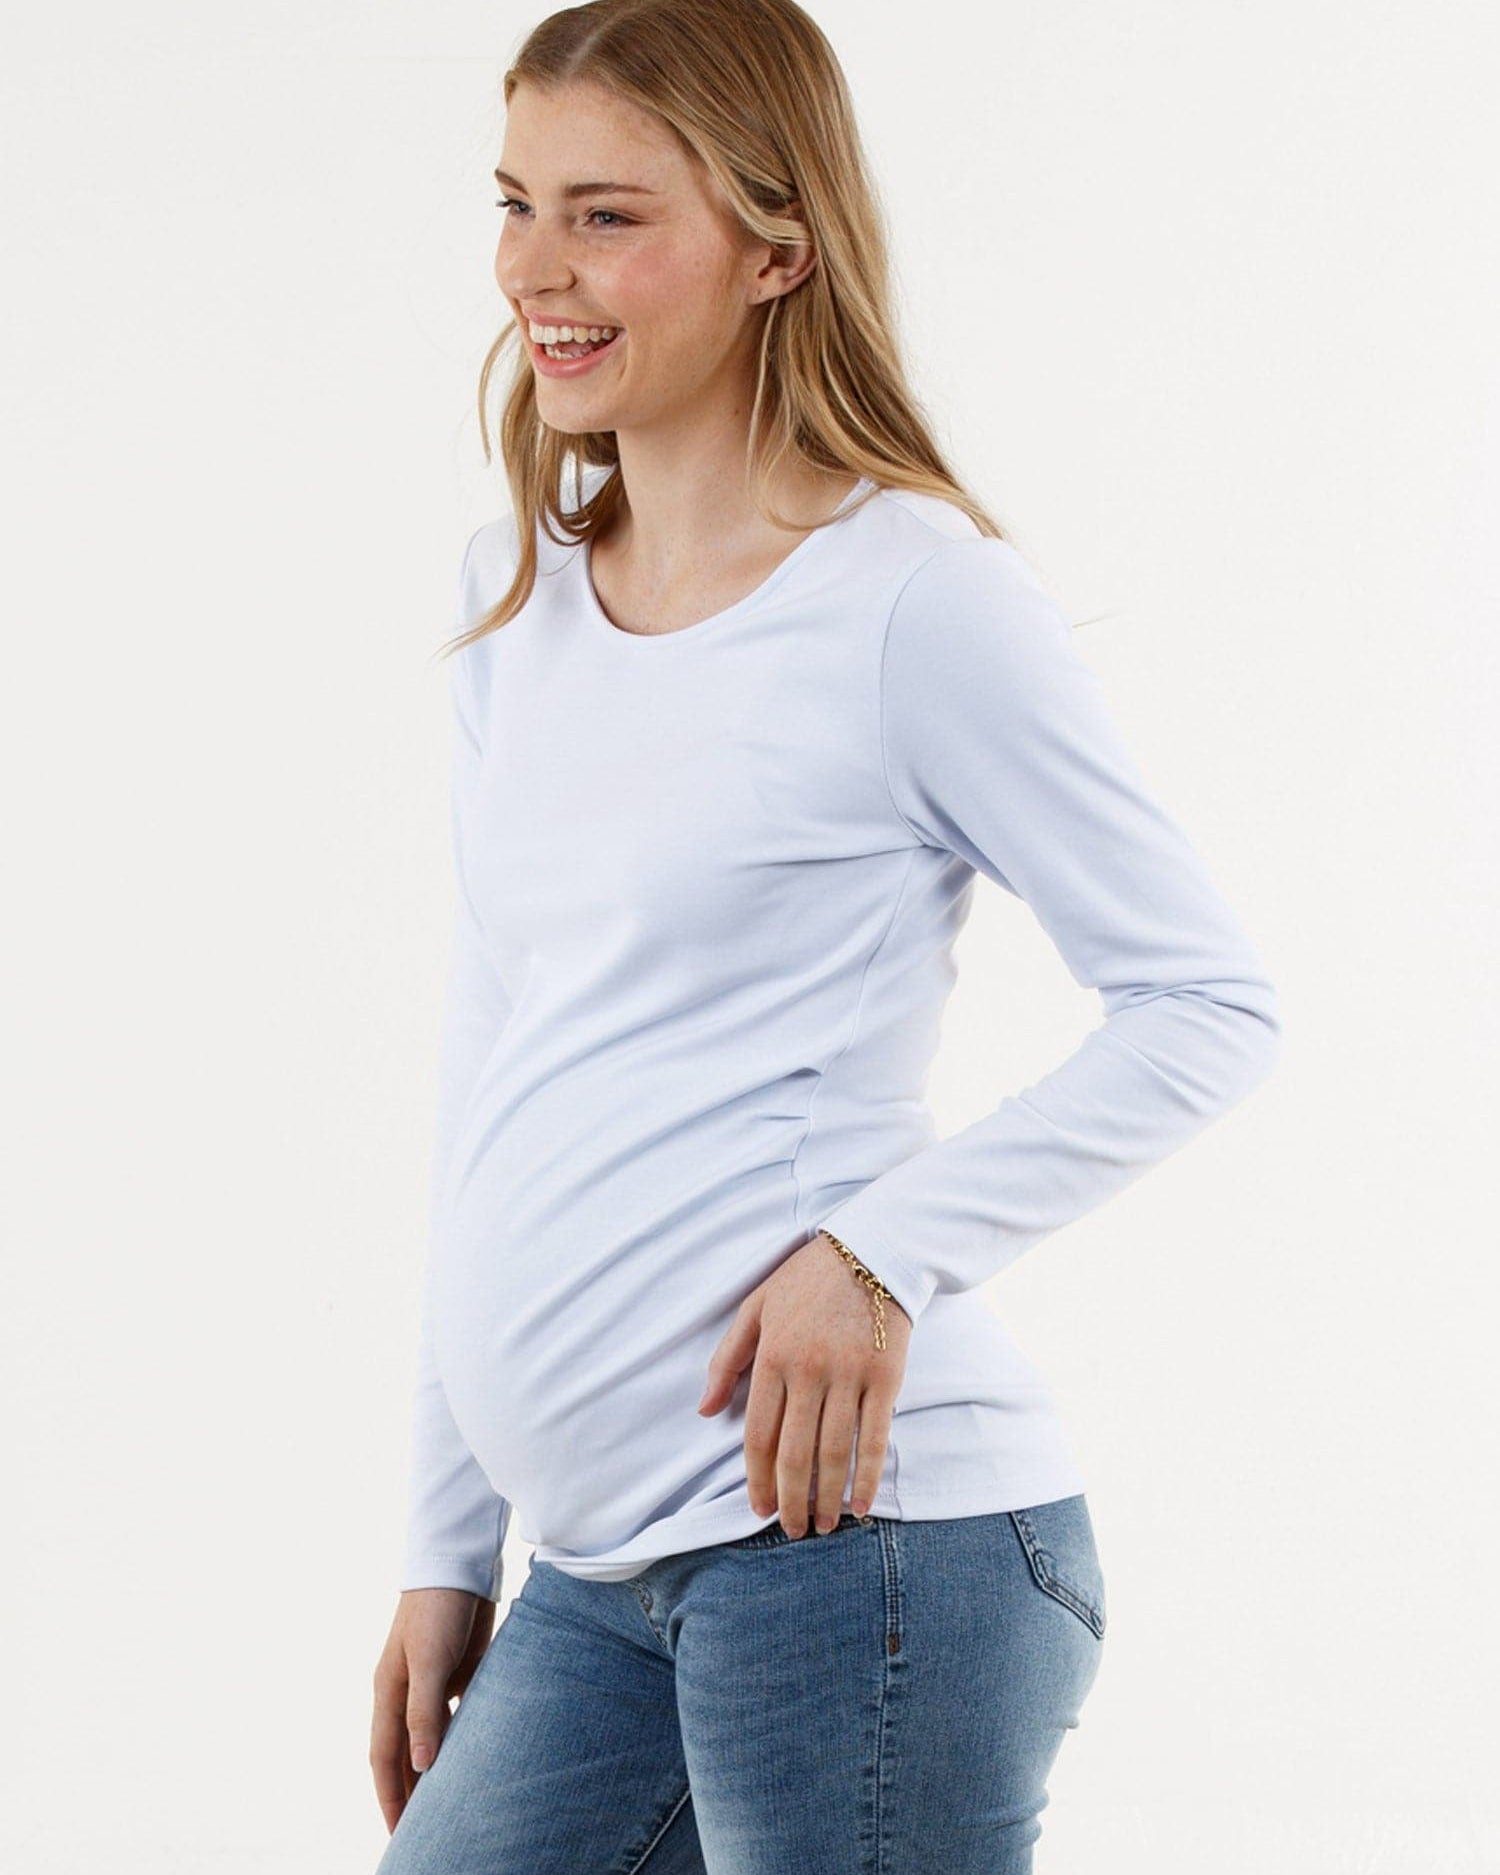 Essential Maternity Long Sleeve Tee in White (6653092069479)